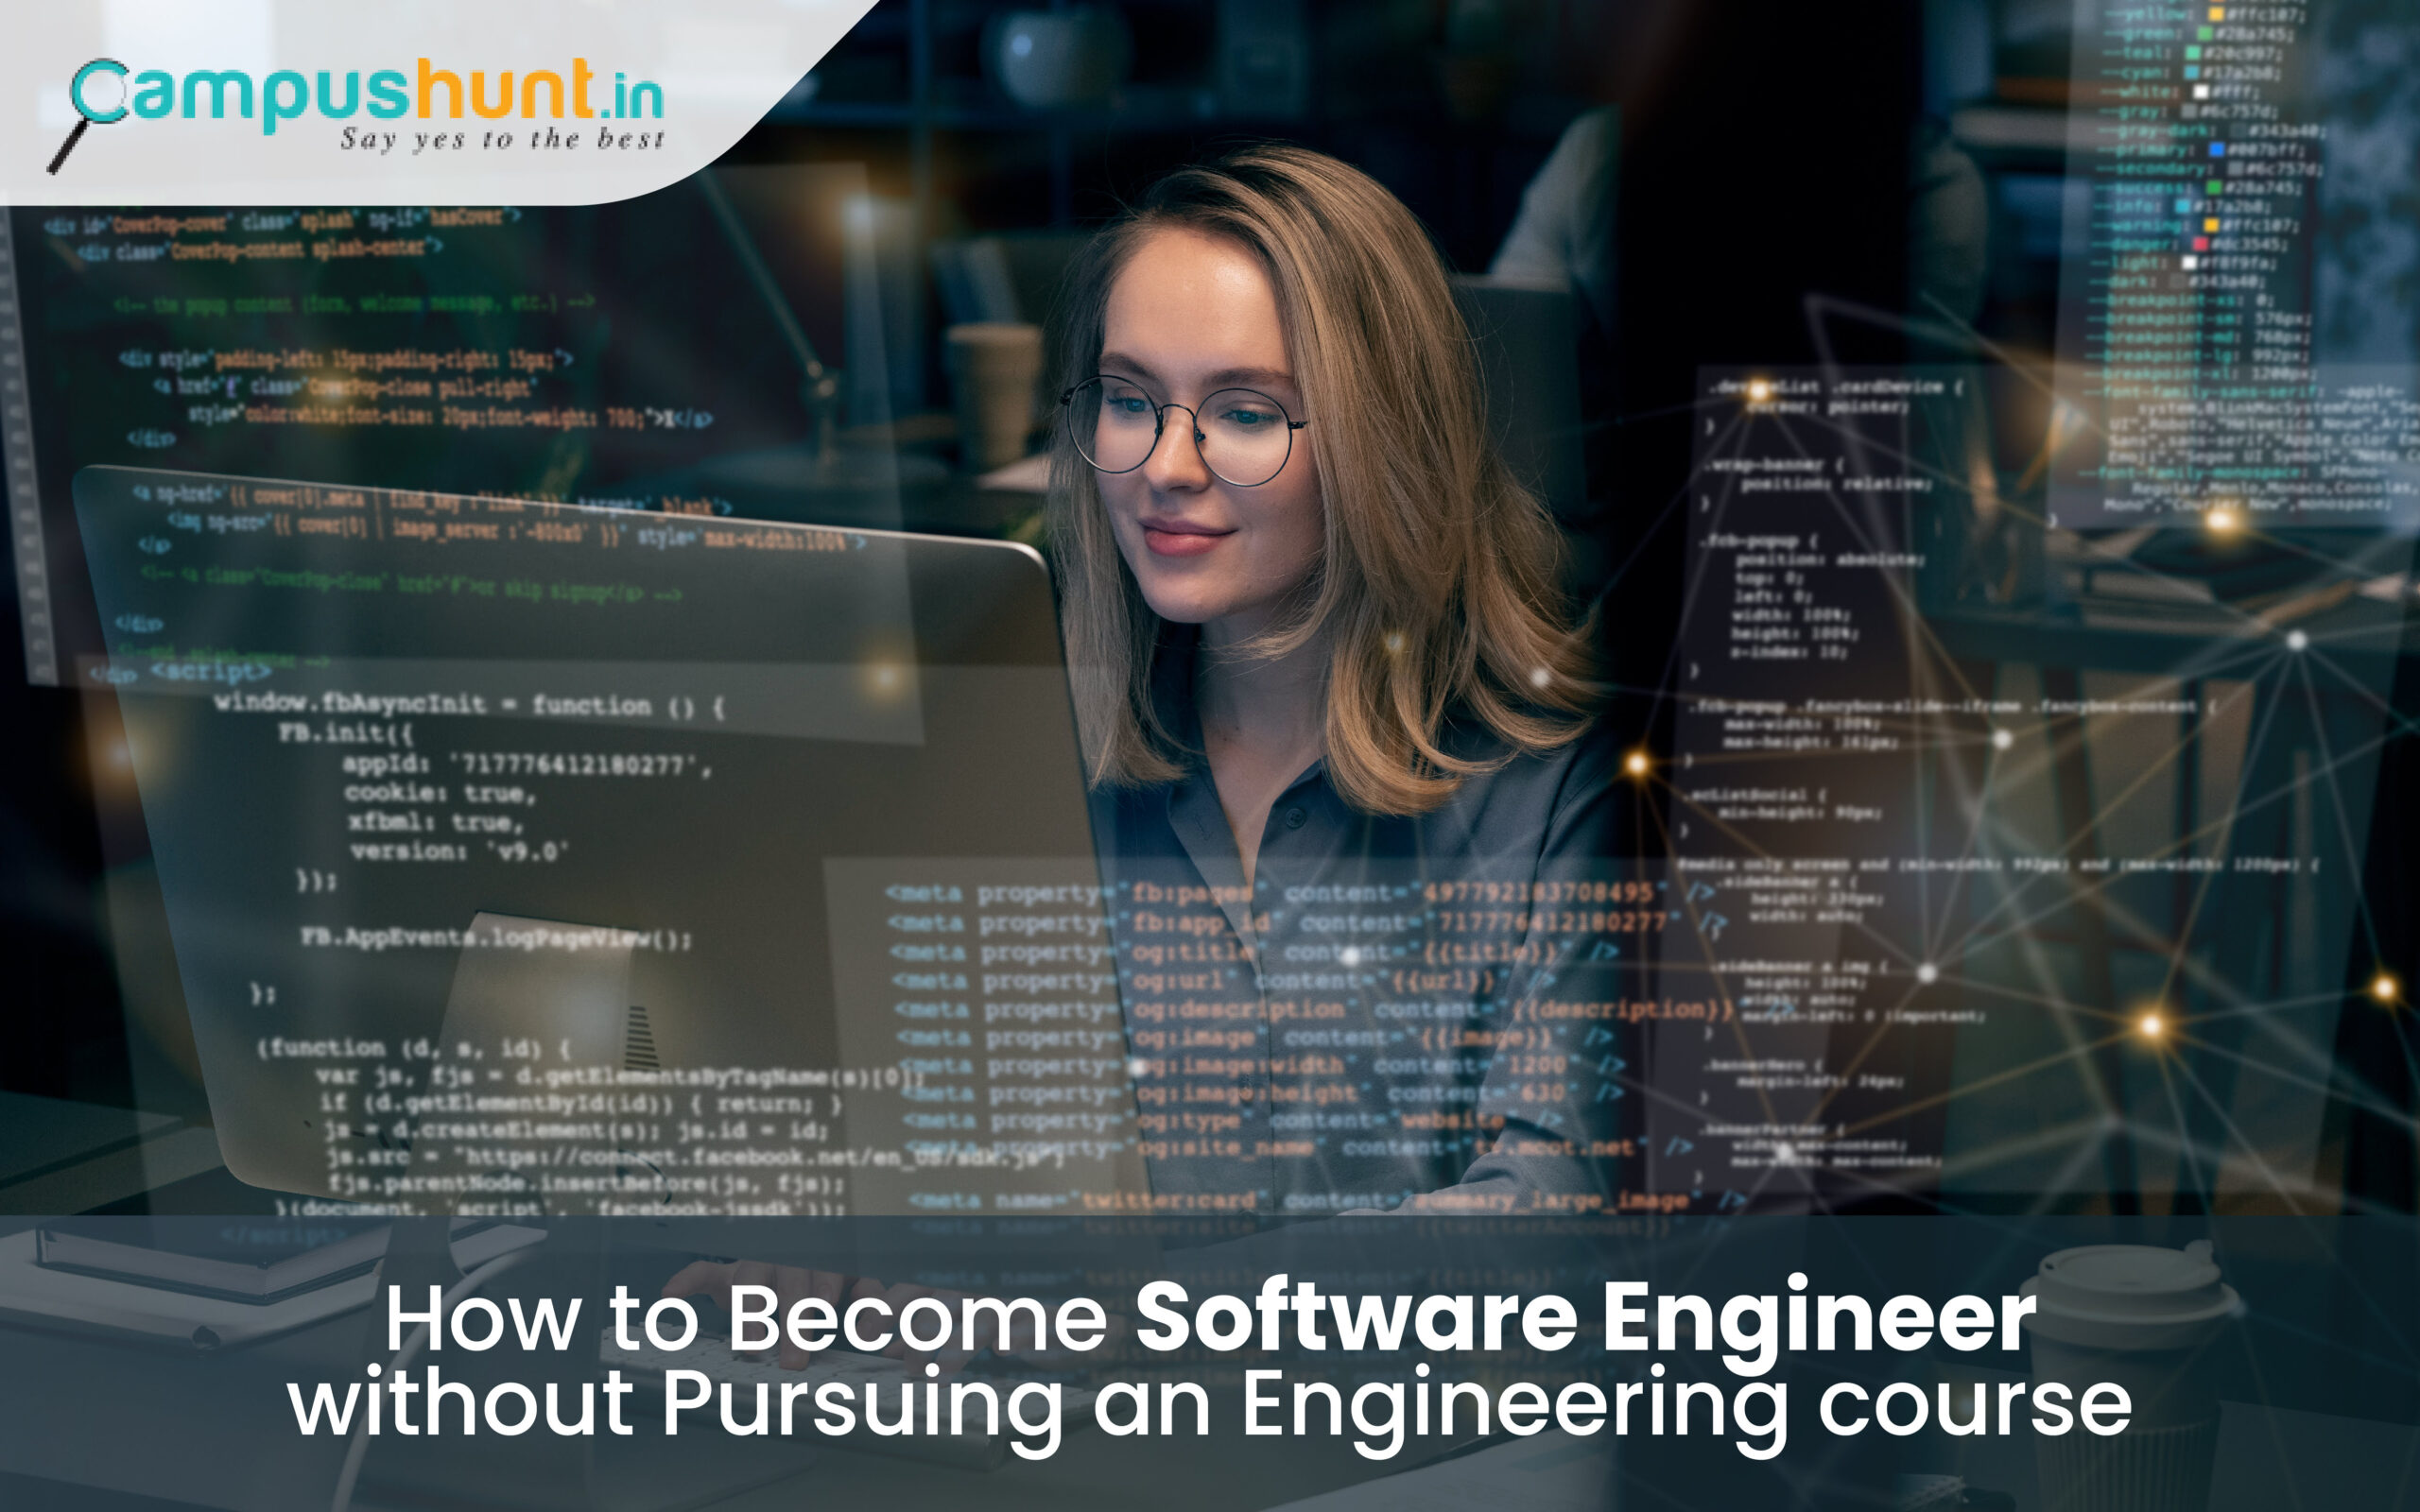 How to Become Software Engineer without pursuing an engineering course